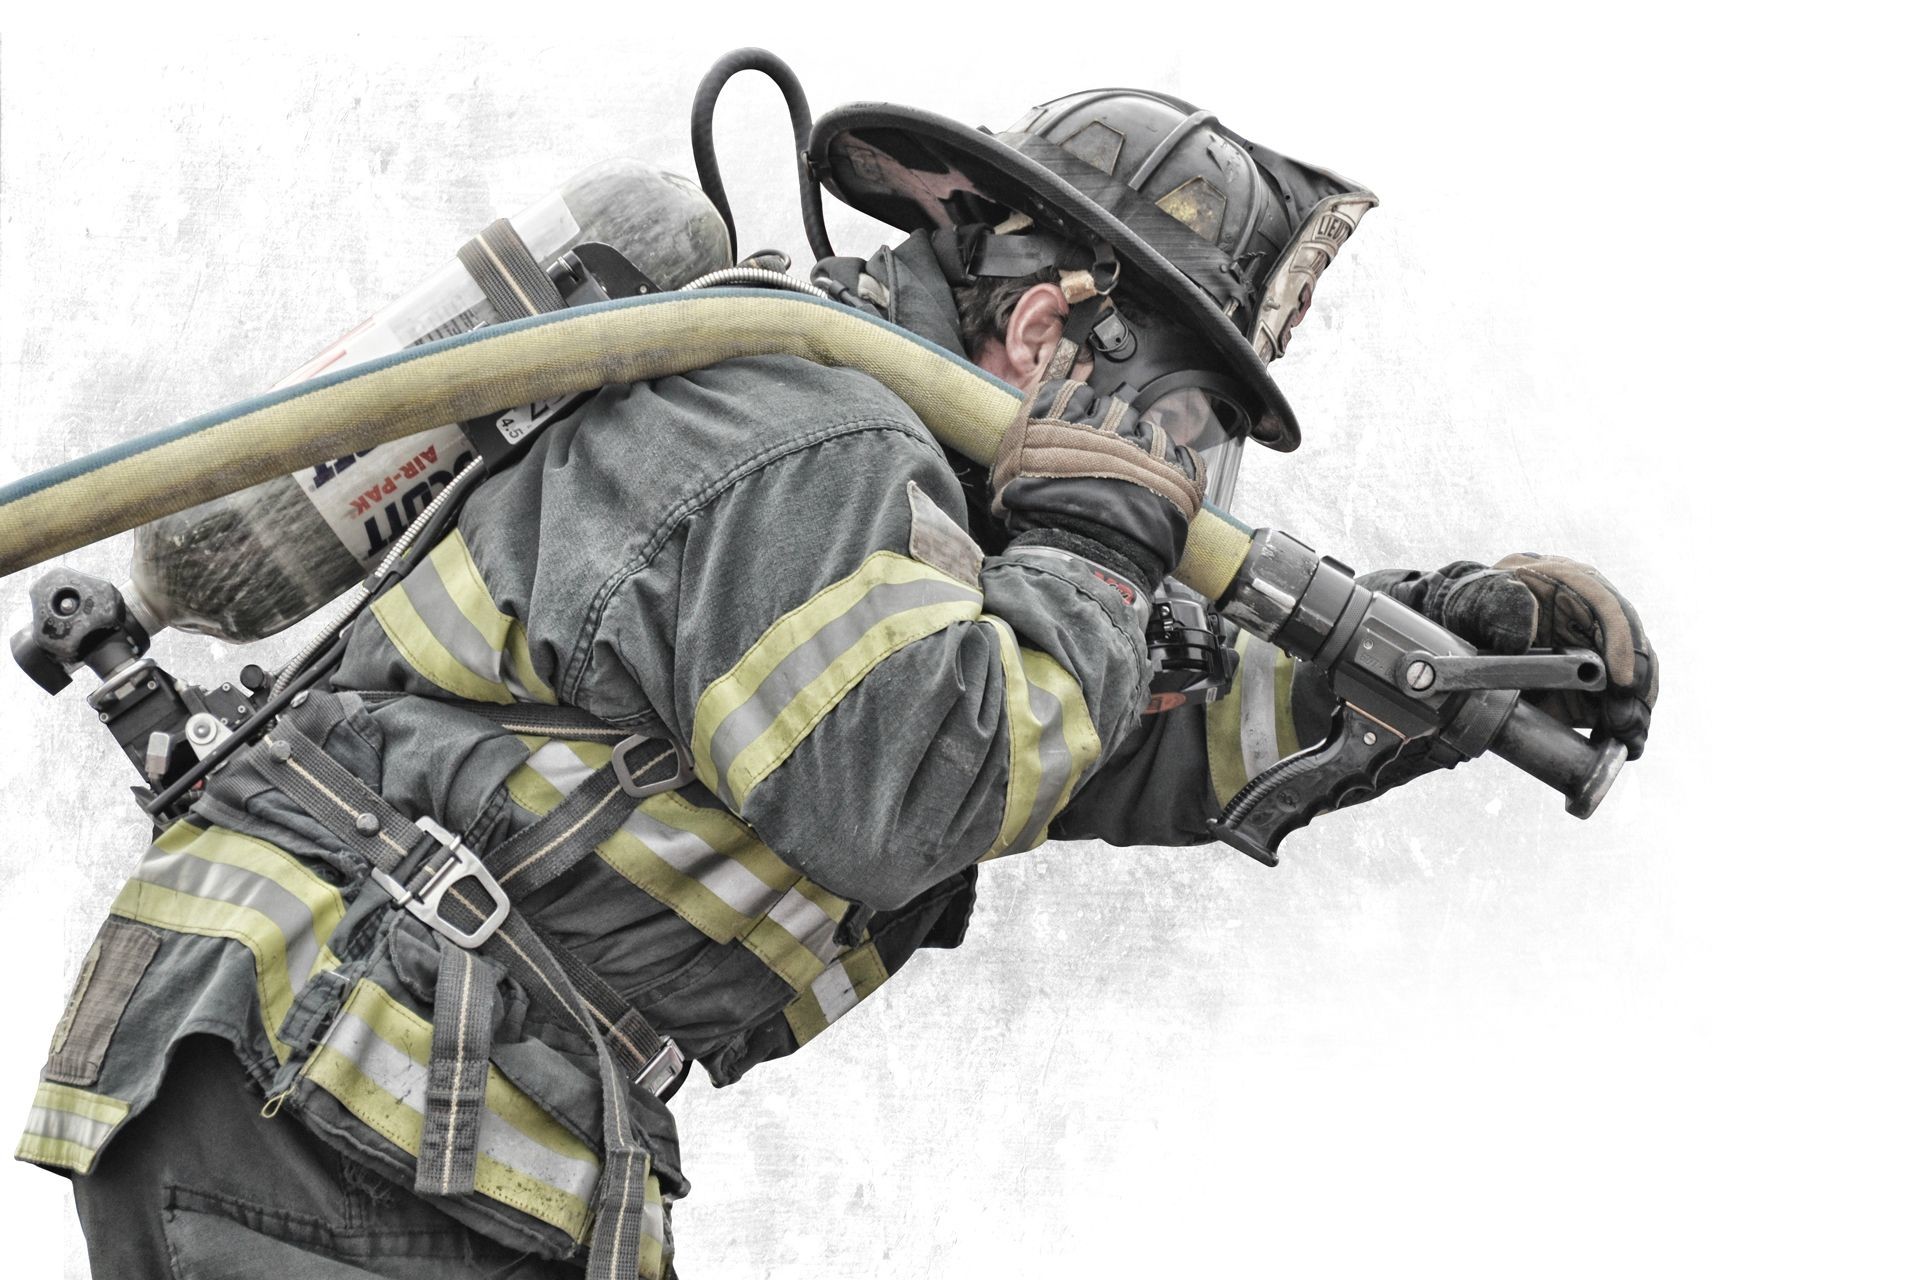 Free Firefighter Wallpaper for Phone 19201280 Firefighting Wallpapers 37 Wallpapers Adorable